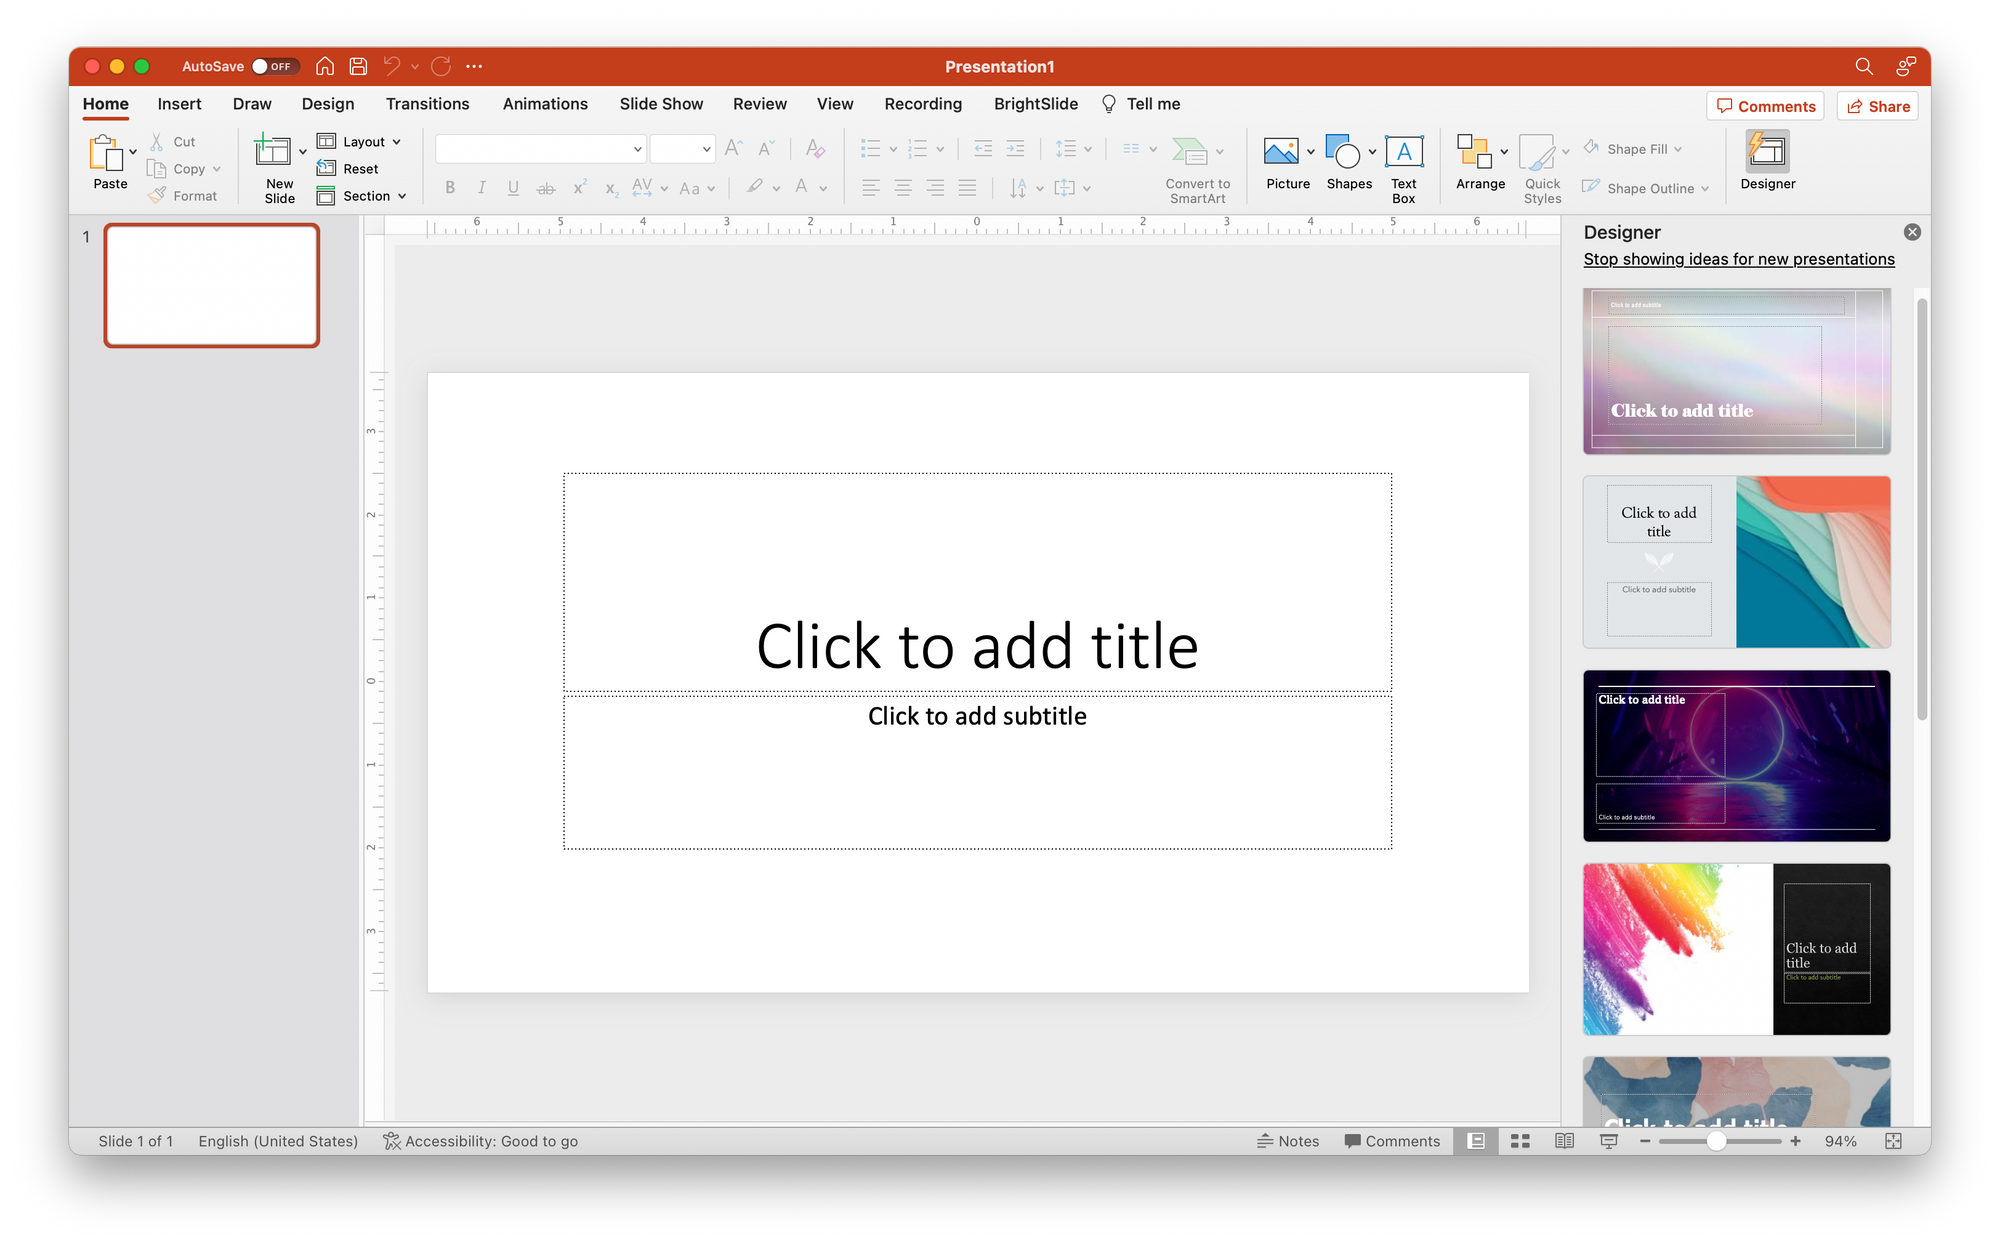 powerpoint presentation from code